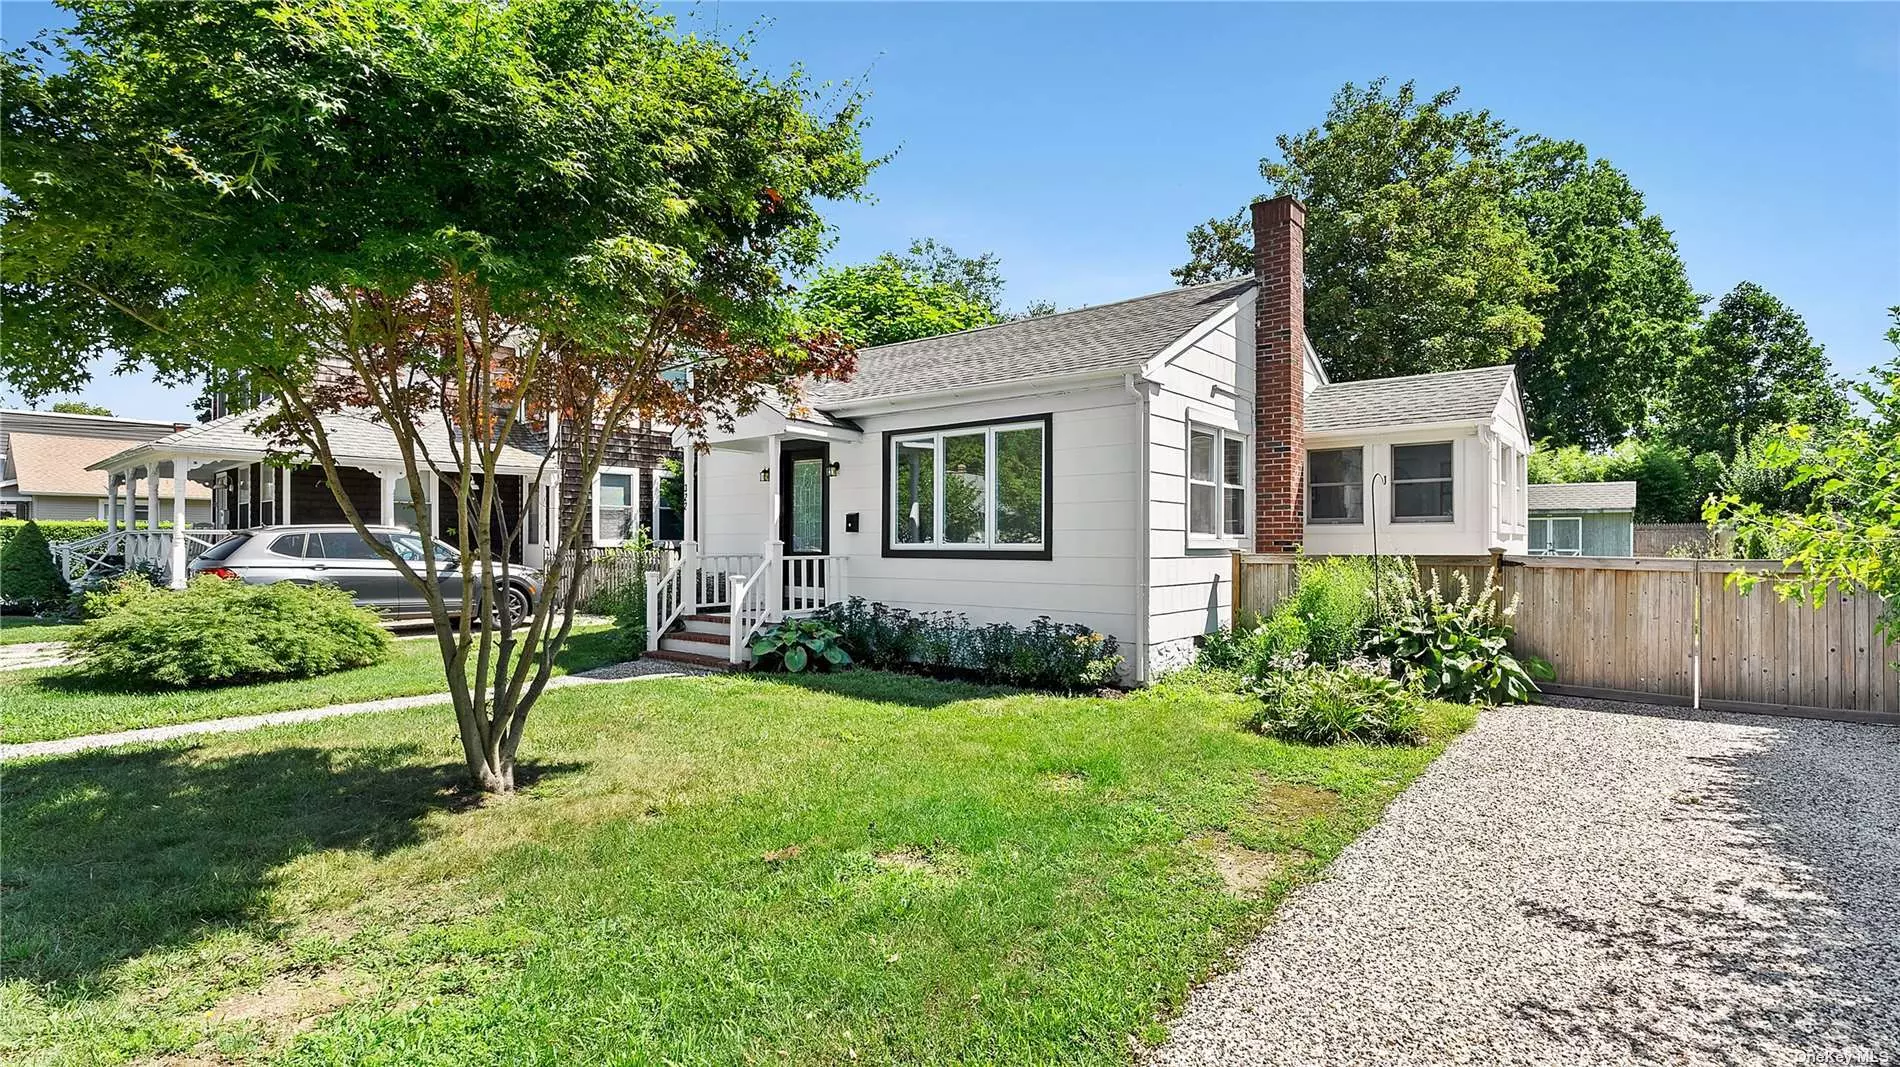 Completely Updated Cottage in Greenport&rsquo;s Favorite Neighborhood.  Easy One Floor Living! Two Bay Beaches, Village Shops and Restaurants, a Marina and NYC Transportation Nearby. Possible Expansion with Proper Permits!